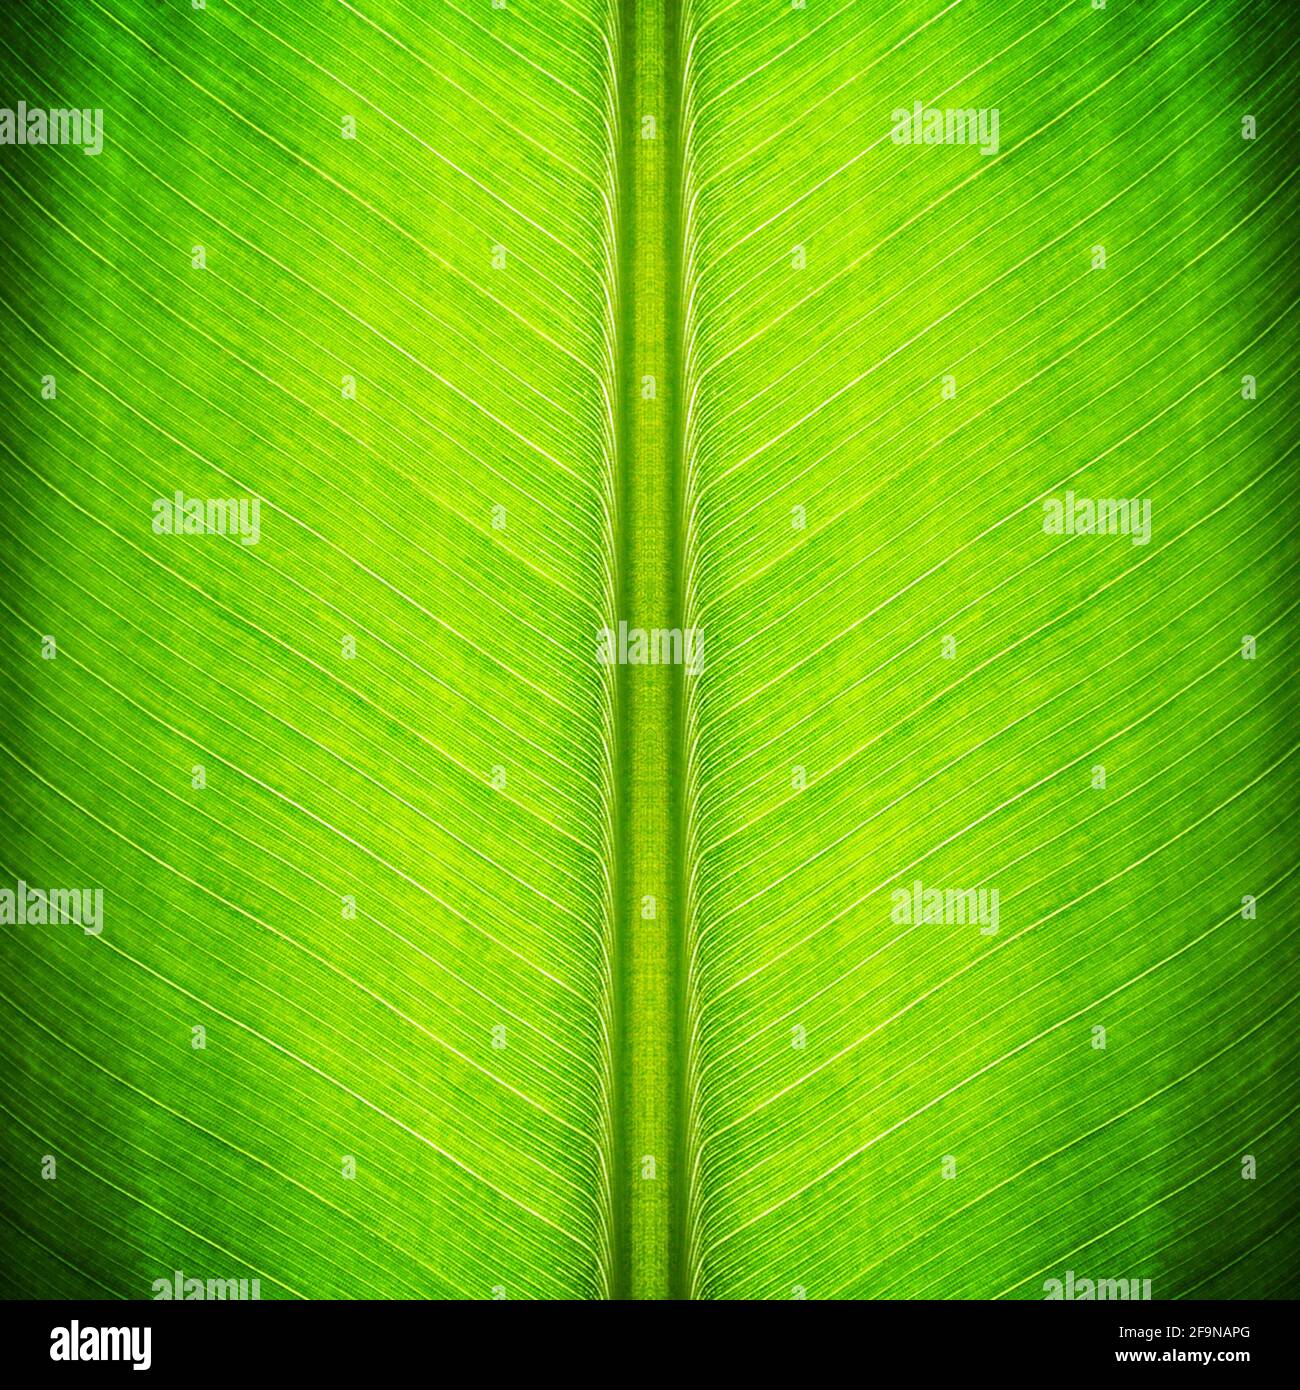 Green banana leaf texture as natural background Stock Photo